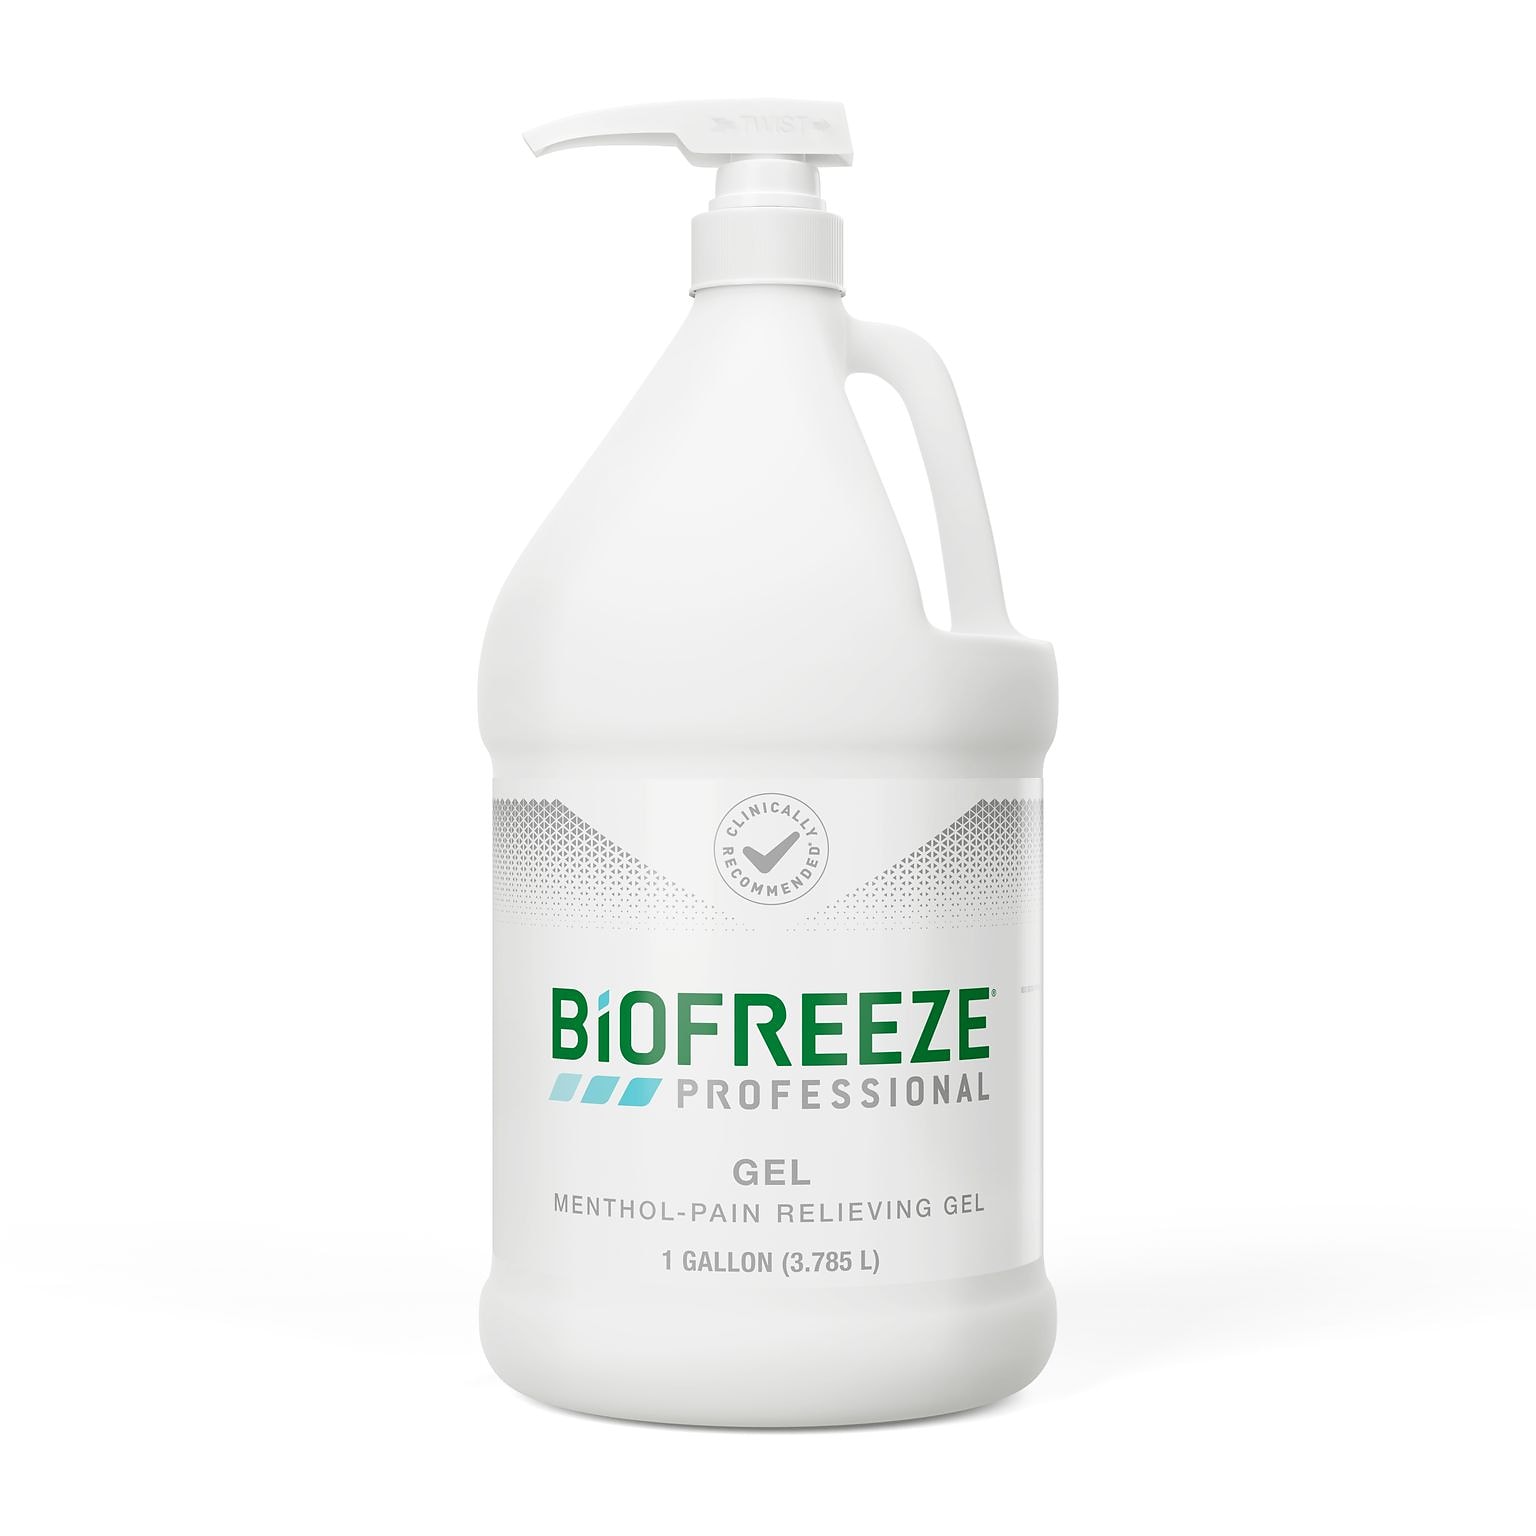 BIOFREEZE® Professional Pain-Relieving Gel Products, Gallon Bottle with Pump